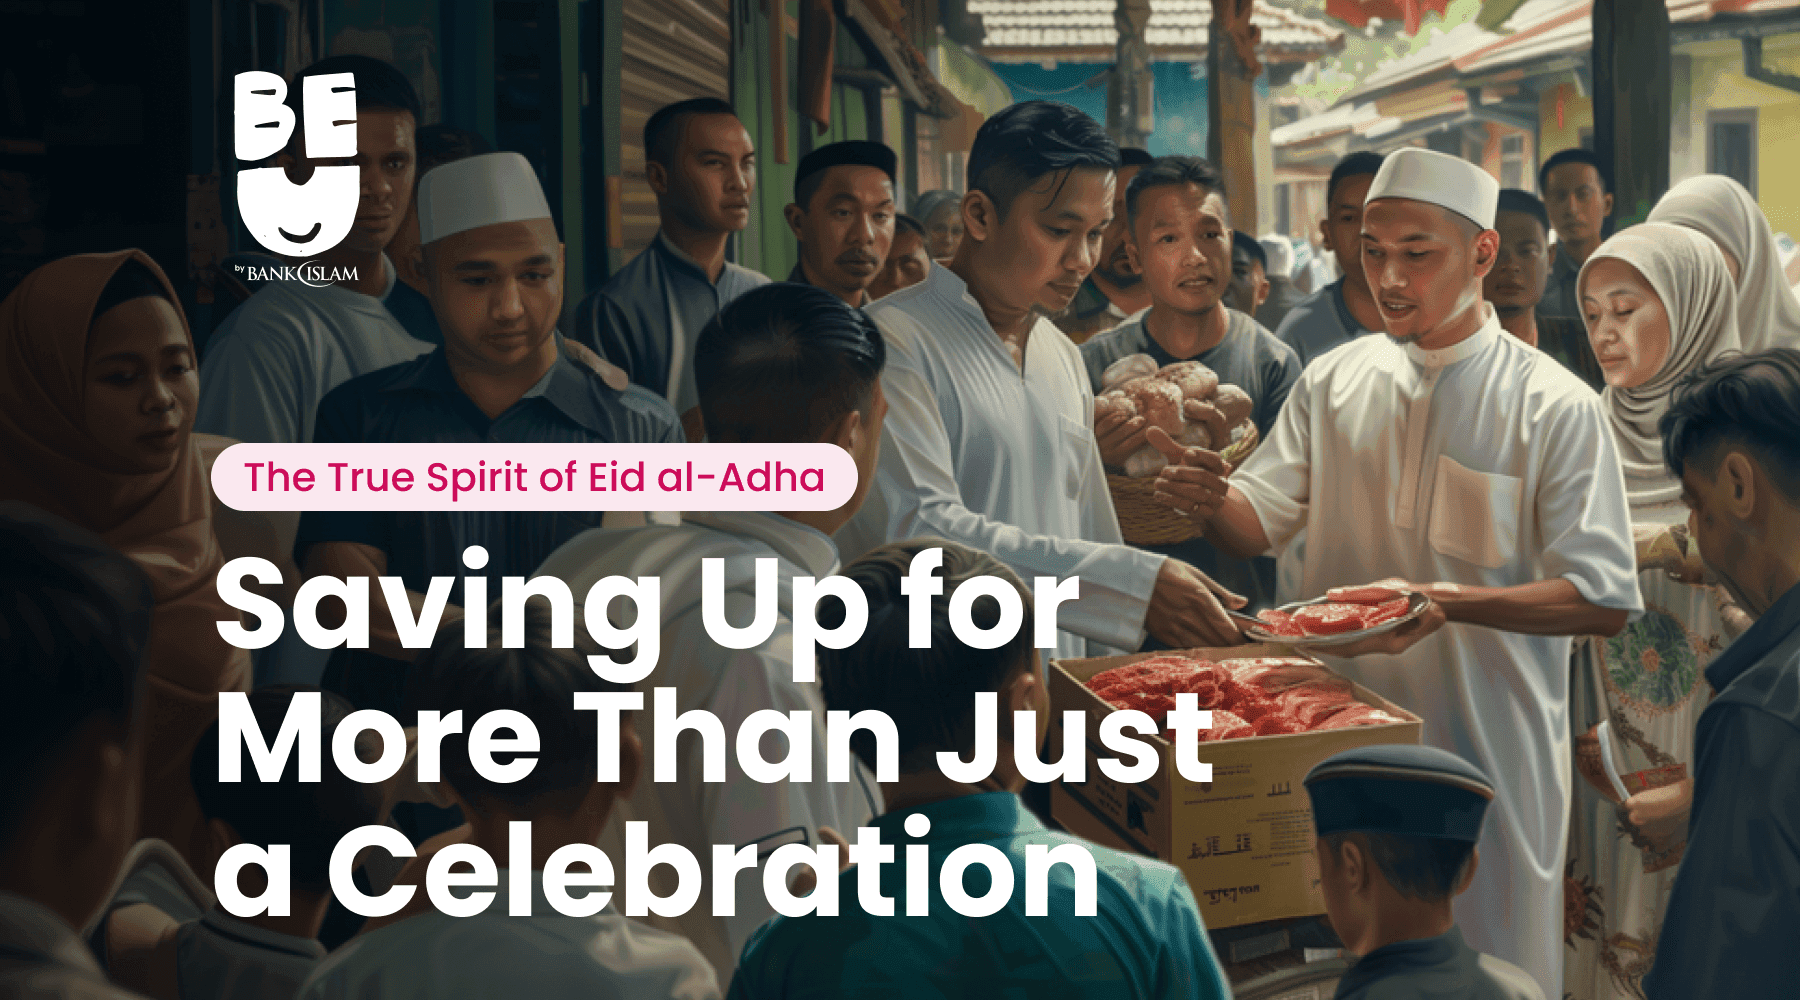 The True Spirit of Eid al-Adha: Saving Up for More Than Just a Celebration